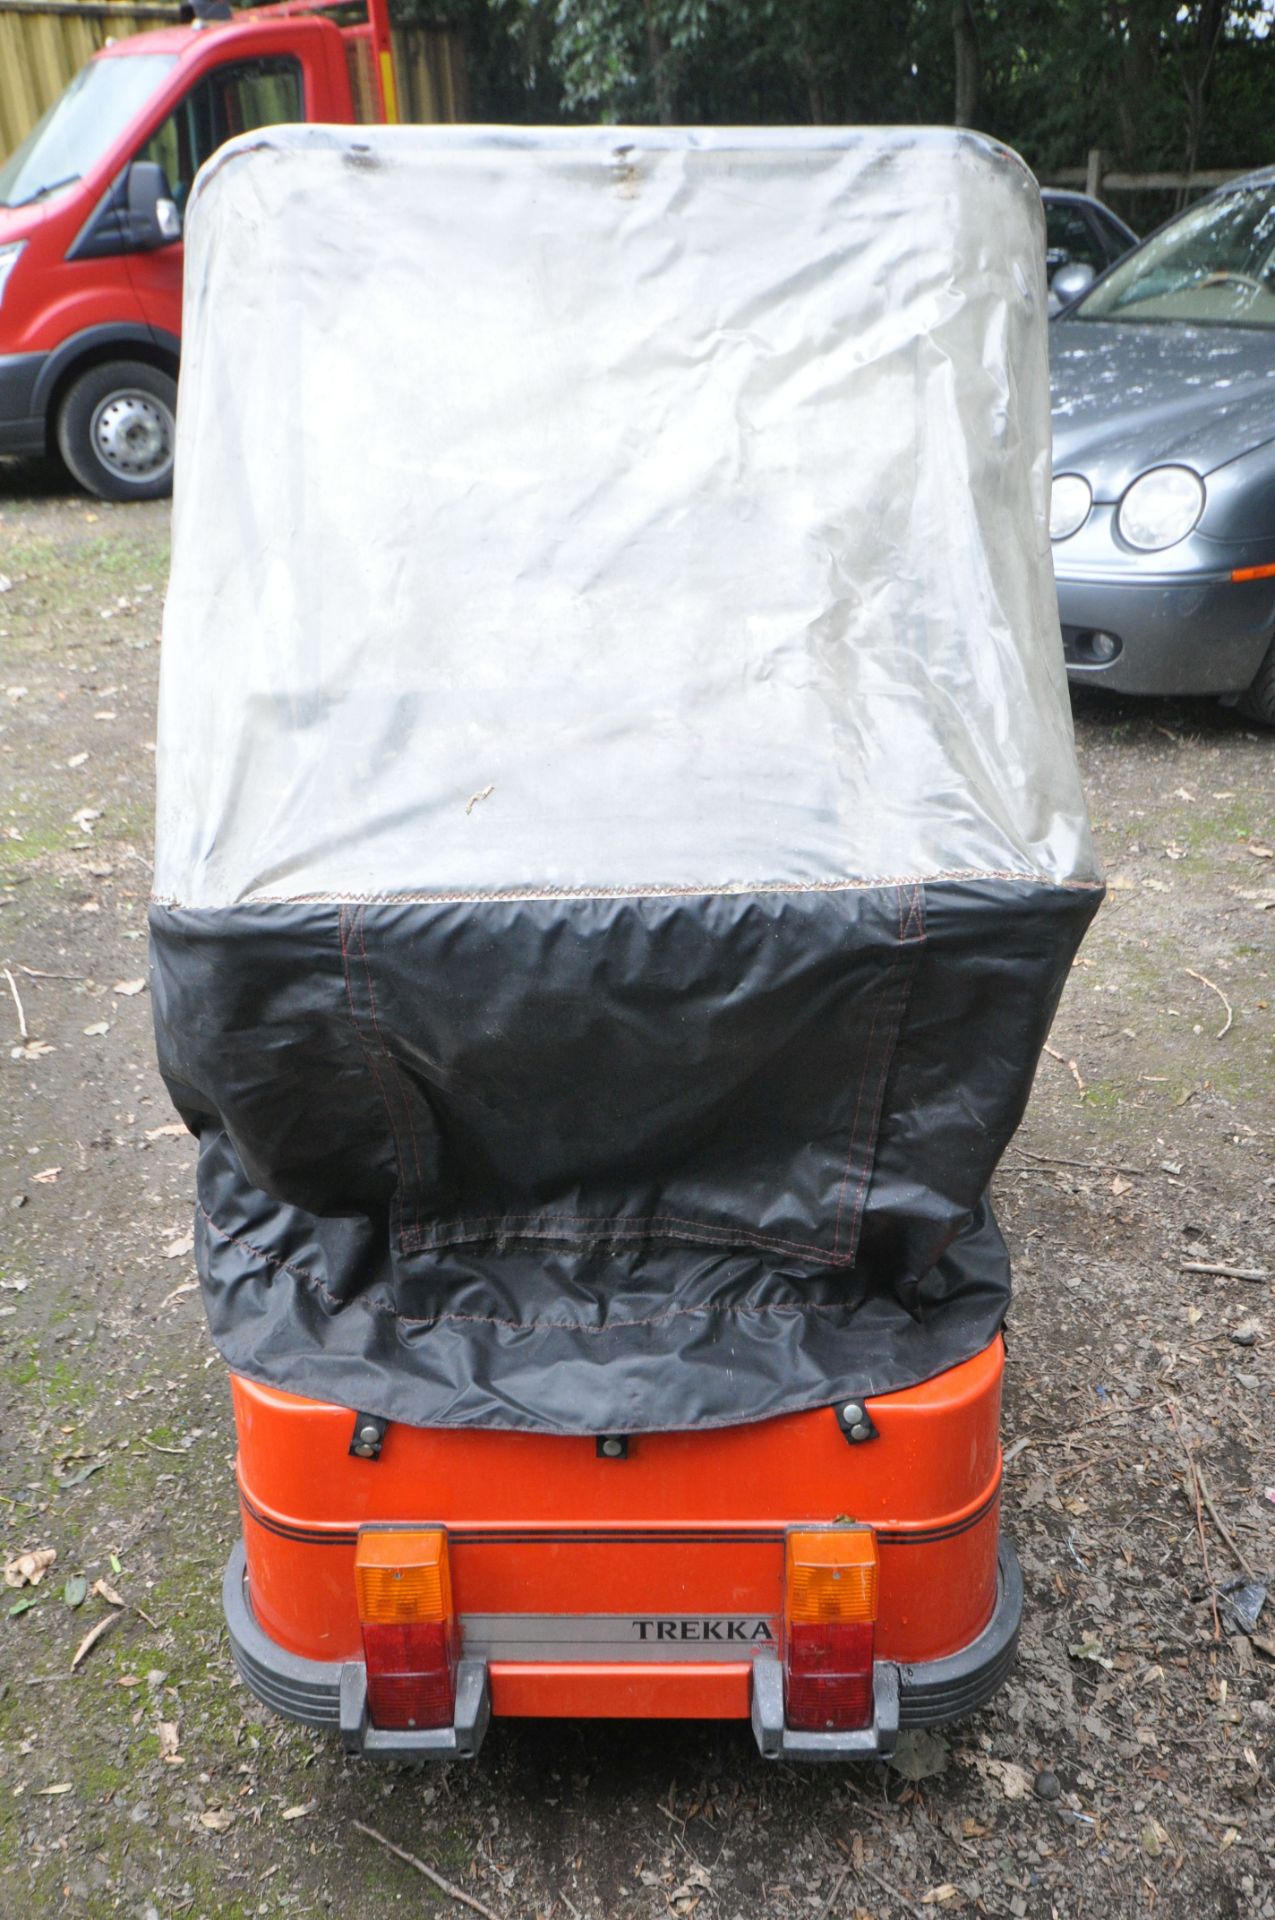 A CLASSIC 1984 VESSA TREKKA ORANGE MOBILITY SCOOTER, with rain cover and charger (untested) ( - Image 6 of 6